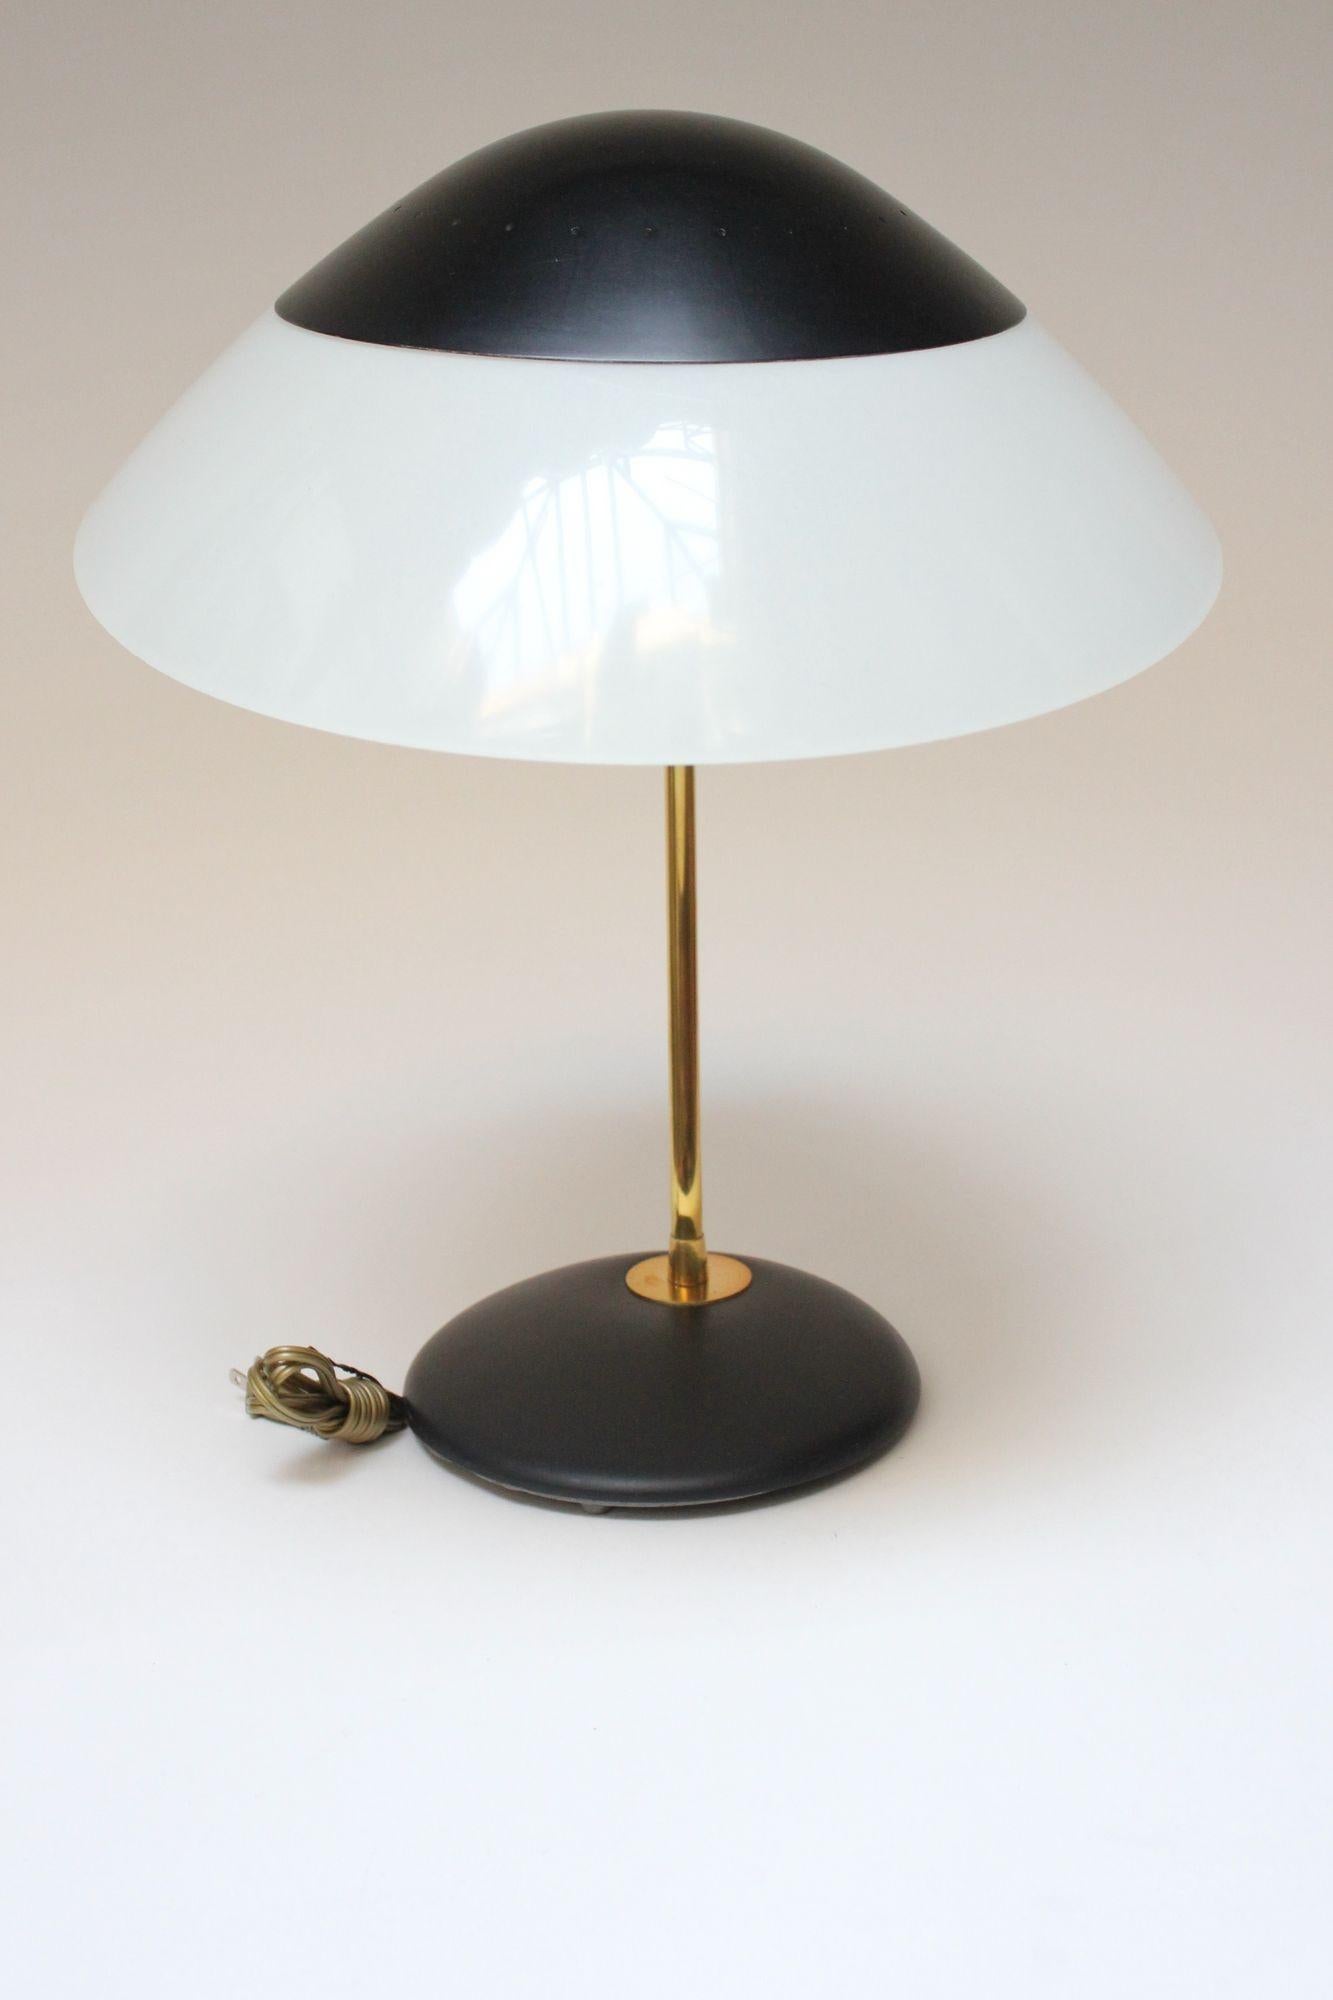 Gerald Thurston for Lightolier table/desk lamp with oversized, fully adjustable shade (ca. 1950s, USA). Black enameled metal and plexi hood with brass stem/accents and original, plastic diffuser.
Excellent, restored condition (enamel has been